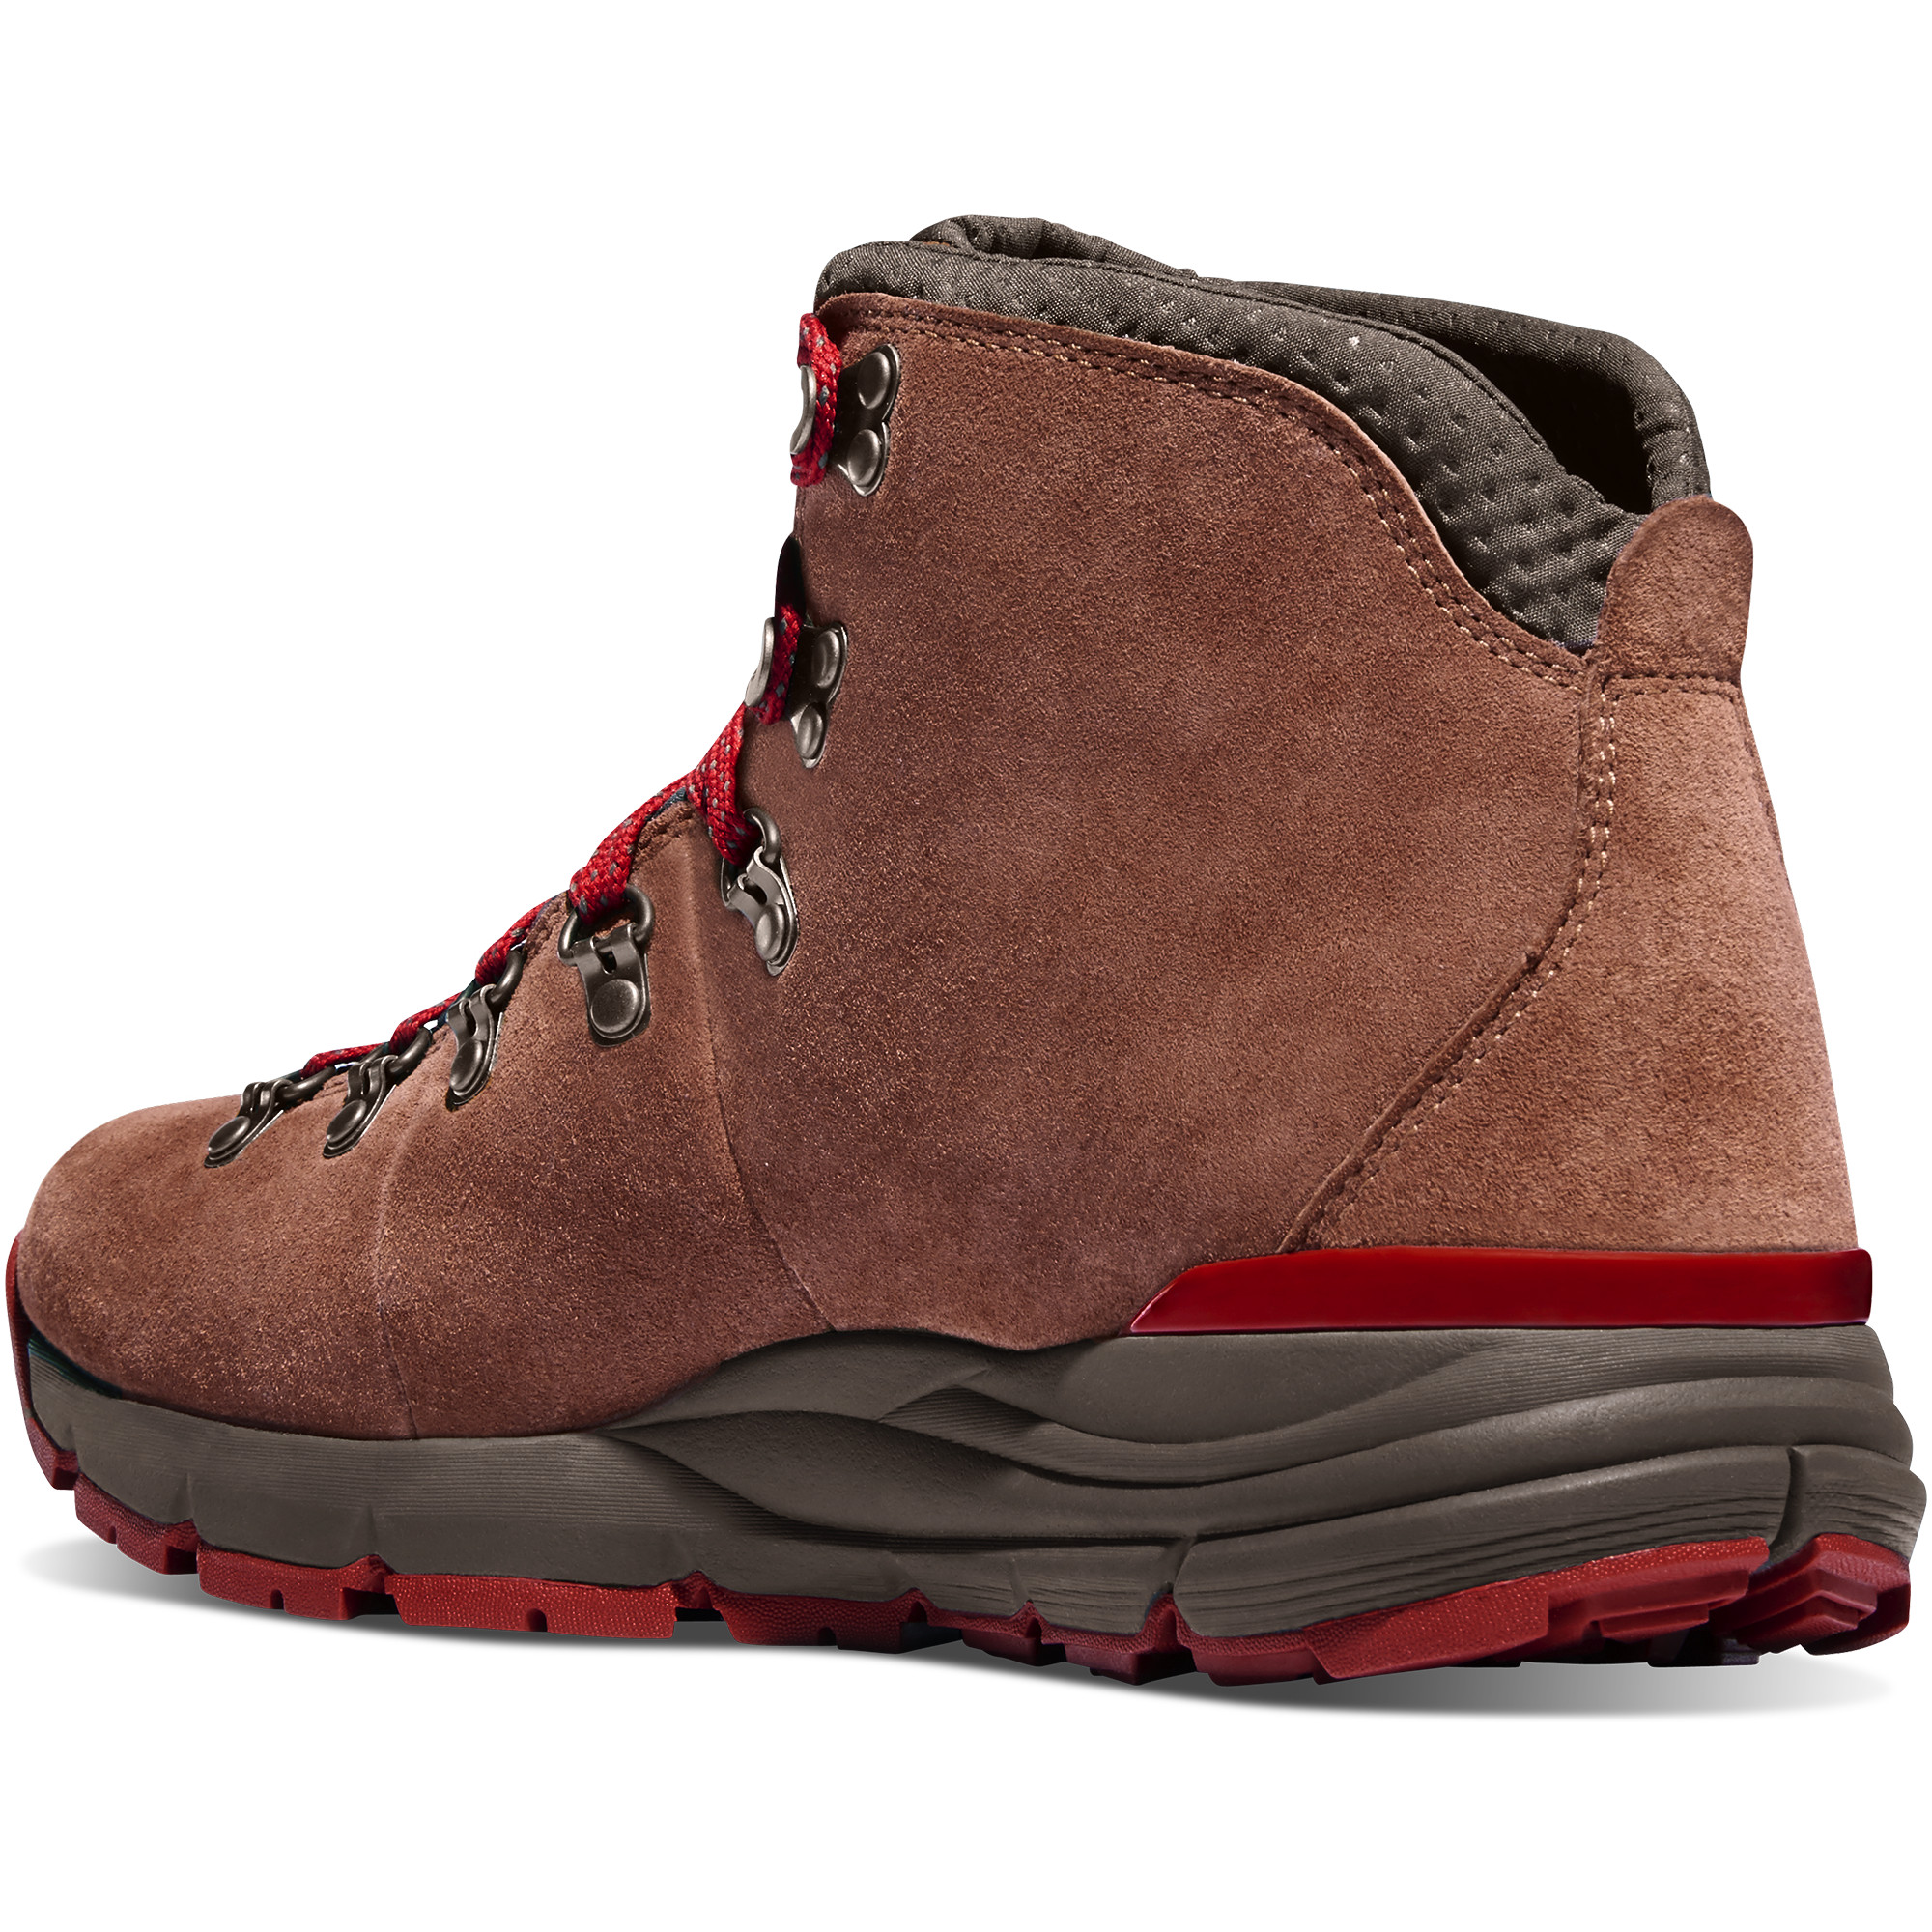 Danner Men's Mountain 600 Hiking Boots (Brown/Red) from Columbia Safety